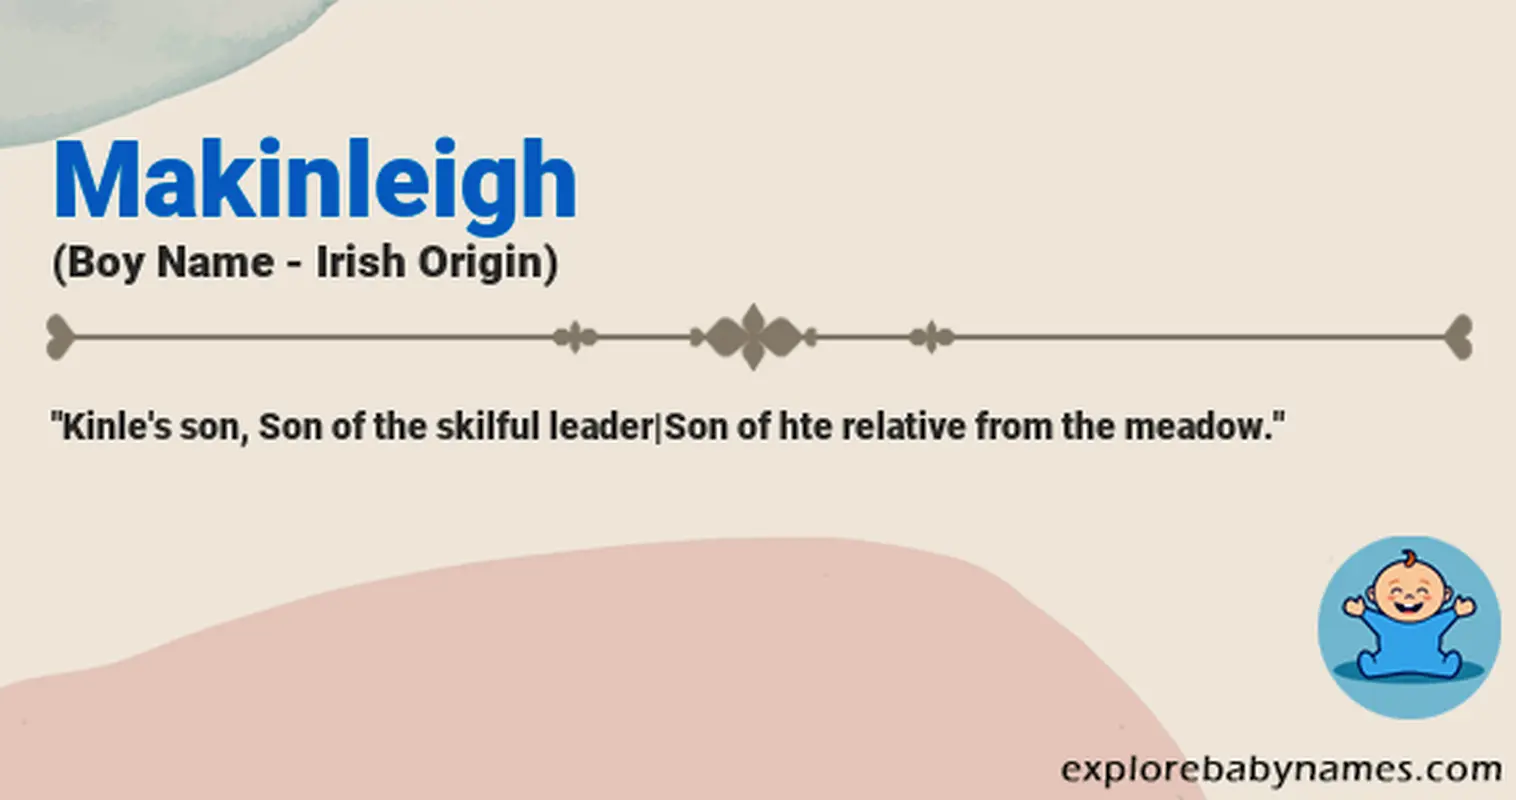 Meaning of Makinleigh